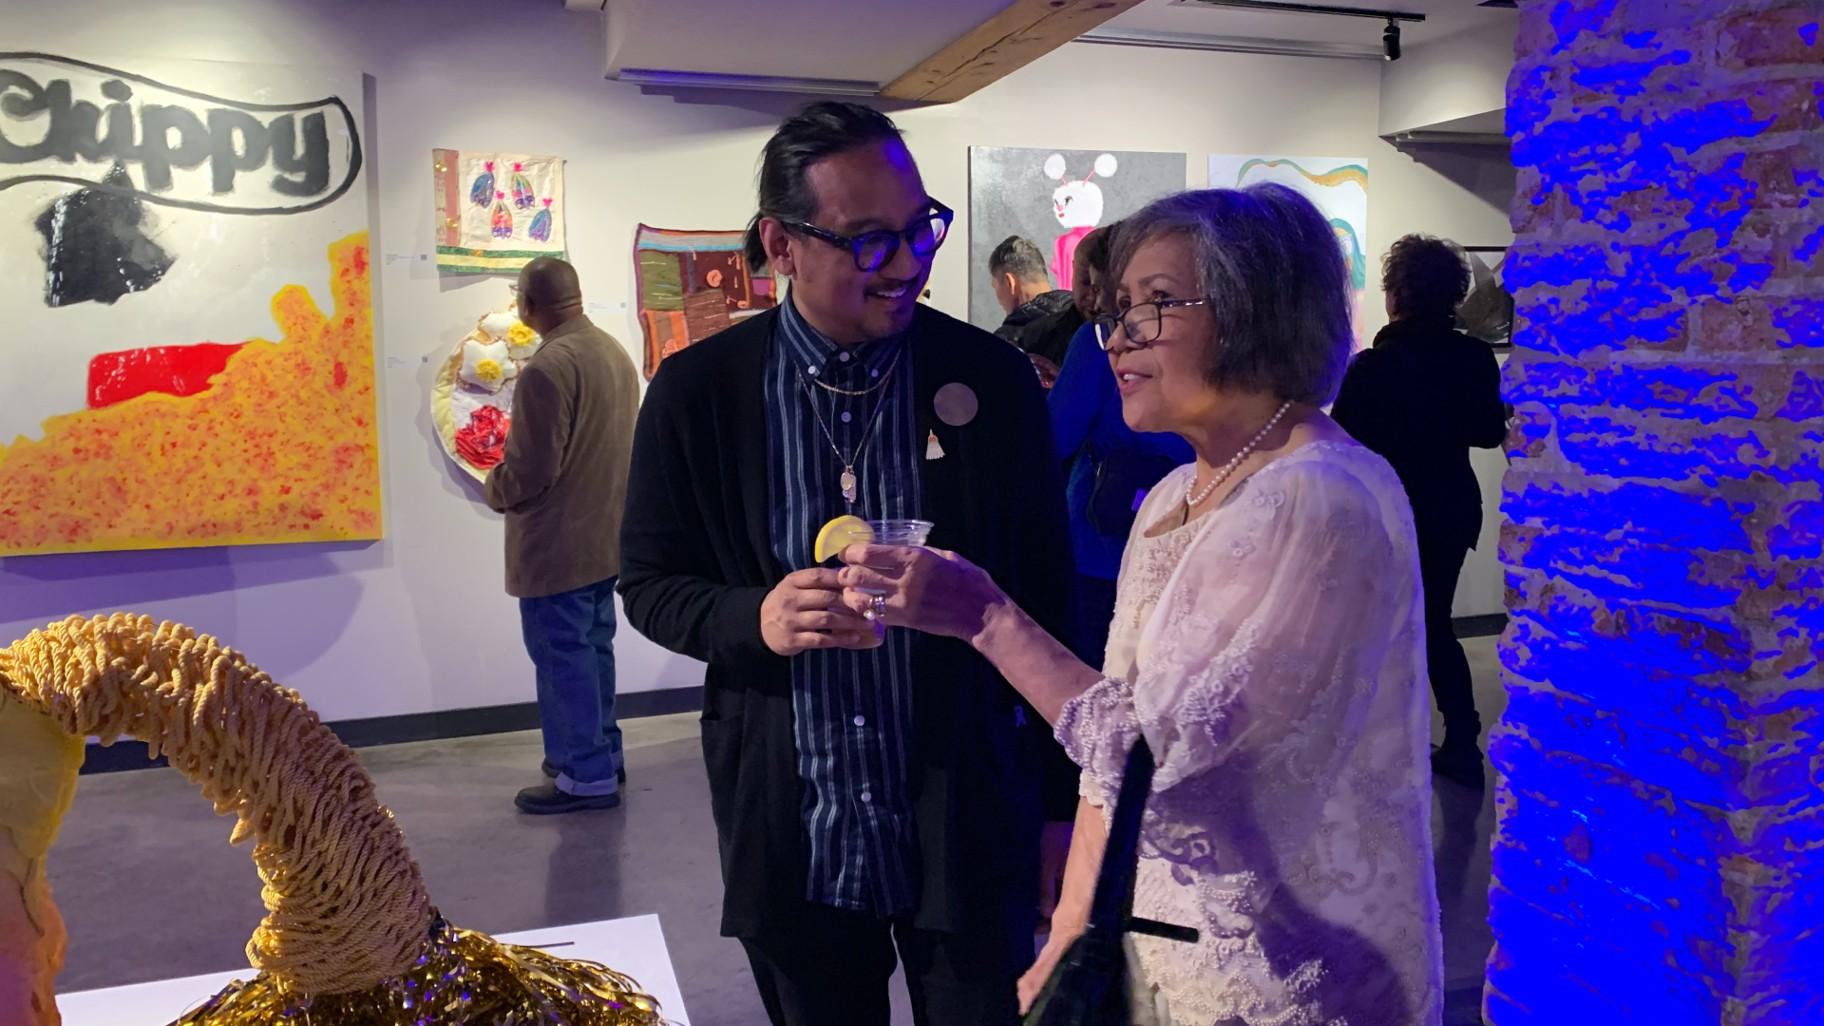 Artist James Bulosan, left, and artist Tita Recometa-Brady, having a conversation at the “More than Lumpia” art exhibit on Oct. 6 at the Epiphany Center for the Arts. (WTTW News / Eunice Alpasan)